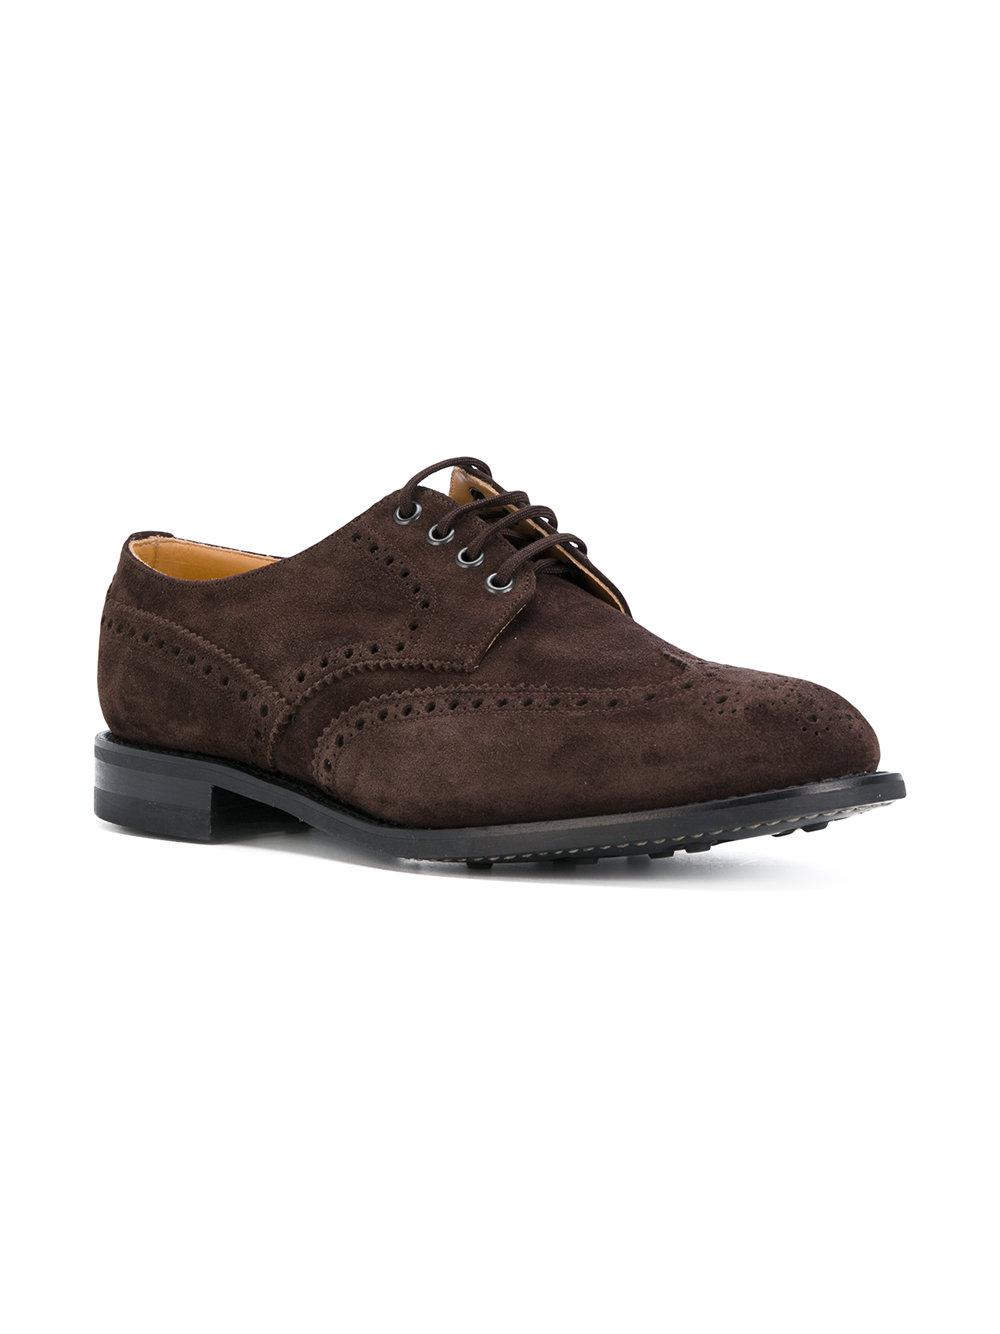 Church's Leather Classic Brogues in Brown for Men - Lyst